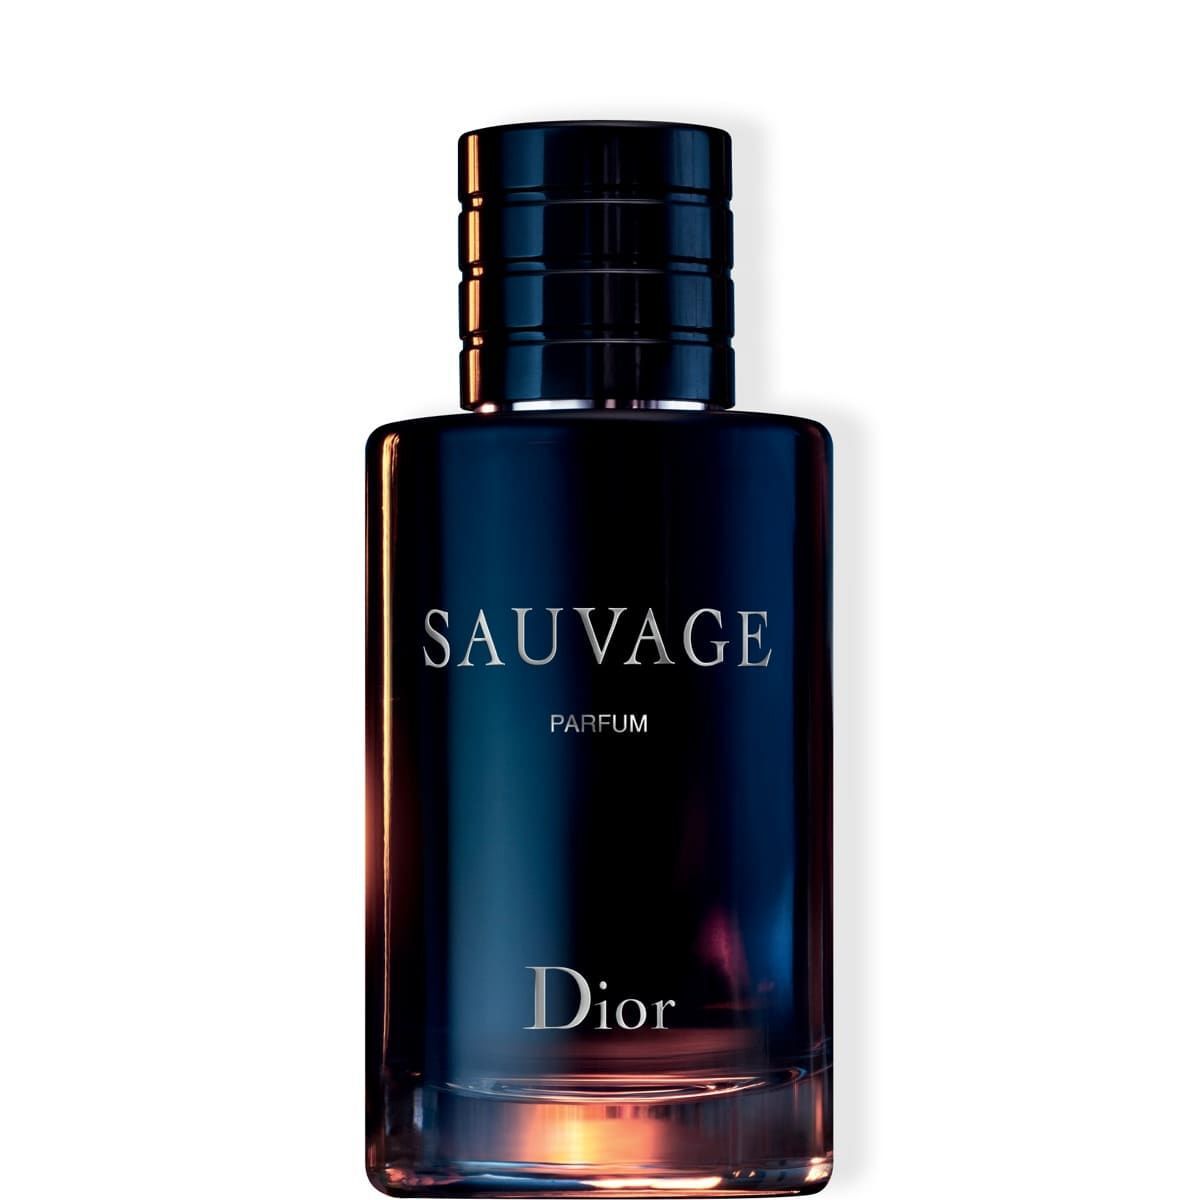 DIOR DISCOVERY SET  Makeup Skincare and Fragrance Set  3 Products  Dior  Online Boutique Singapore